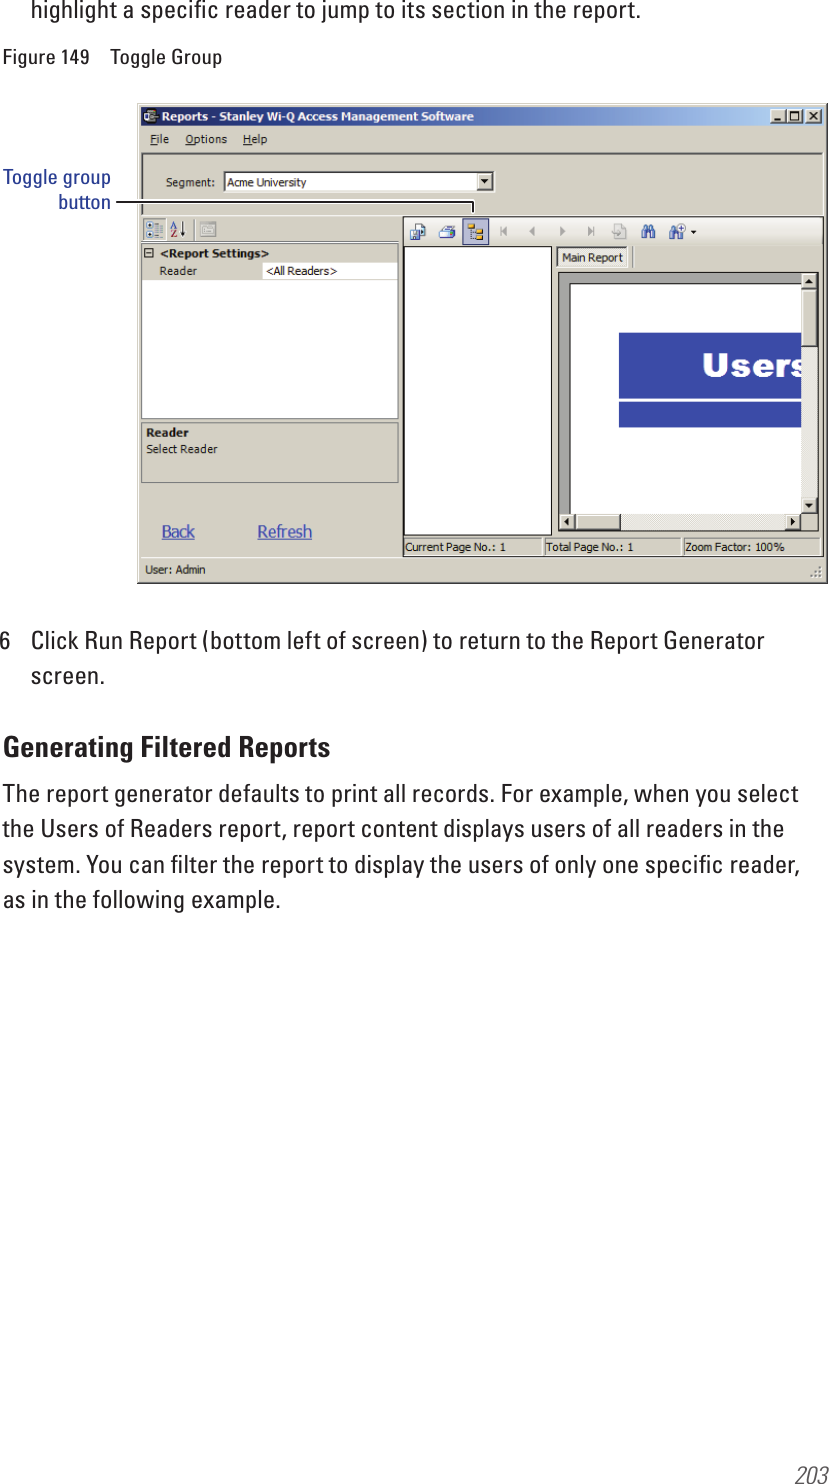 203highlight a speciﬁc reader to jump to its section in the report.Figure 149  Toggle Group6  Click Run Report (bottom left of screen) to return to the Report Generator screen.Generating Filtered ReportsThe report generator defaults to print all records. For example, when you select the Users of Readers report, report content displays users of all readers in the system. You can ﬁlter the report to display the users of only one speciﬁc reader, as in the following example.Toggle group button